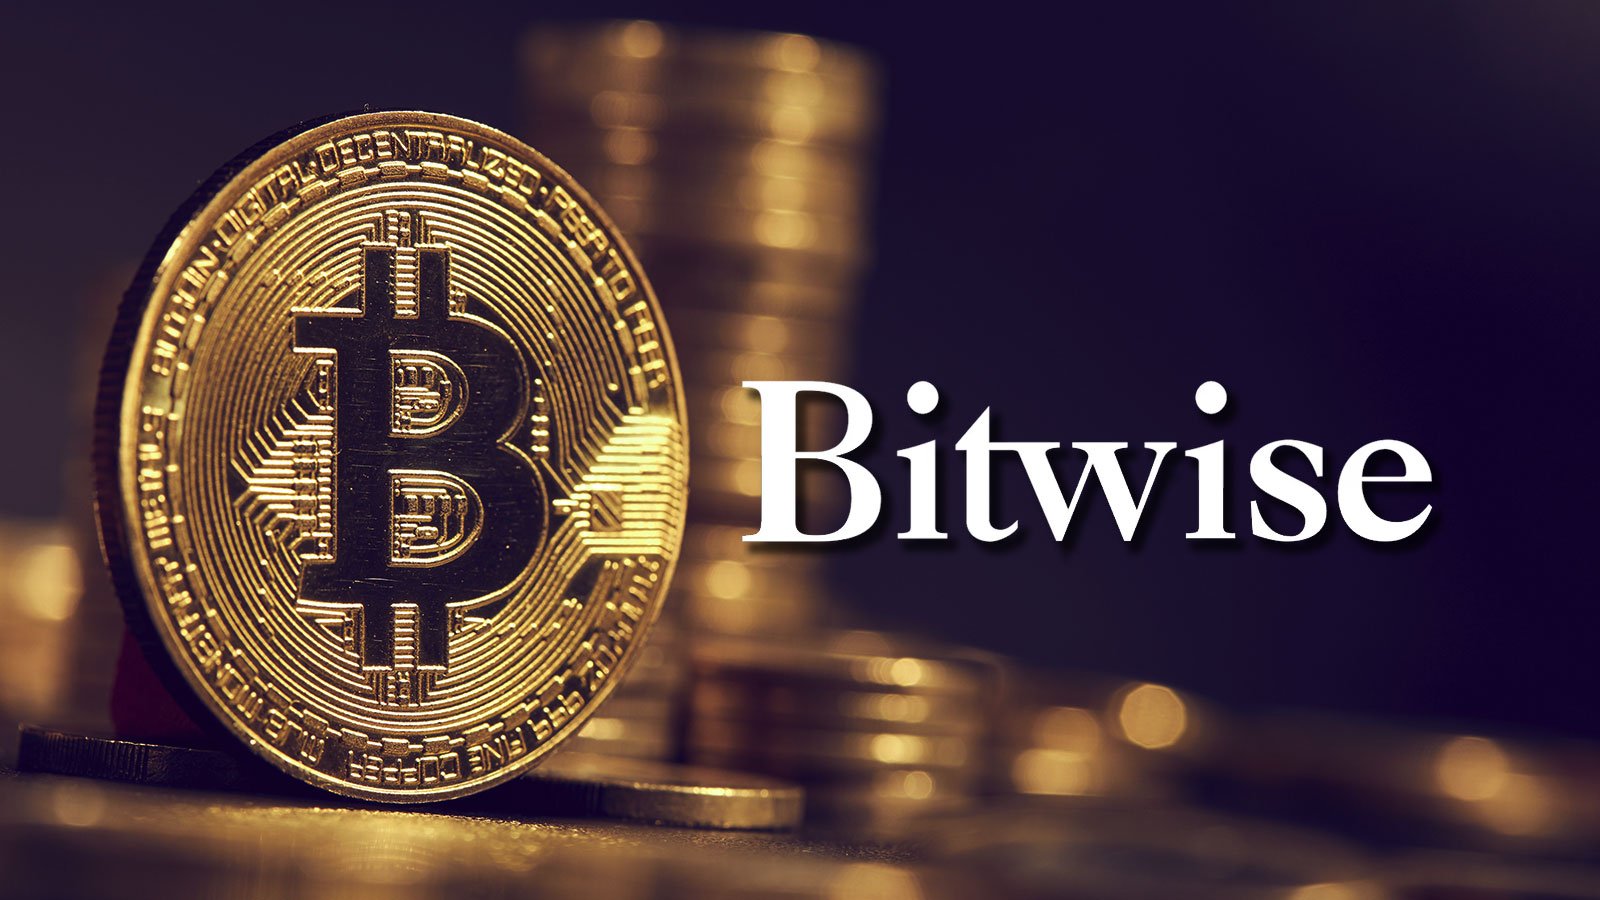 New Bitcoin Futures ETF Application Files by Bitwise